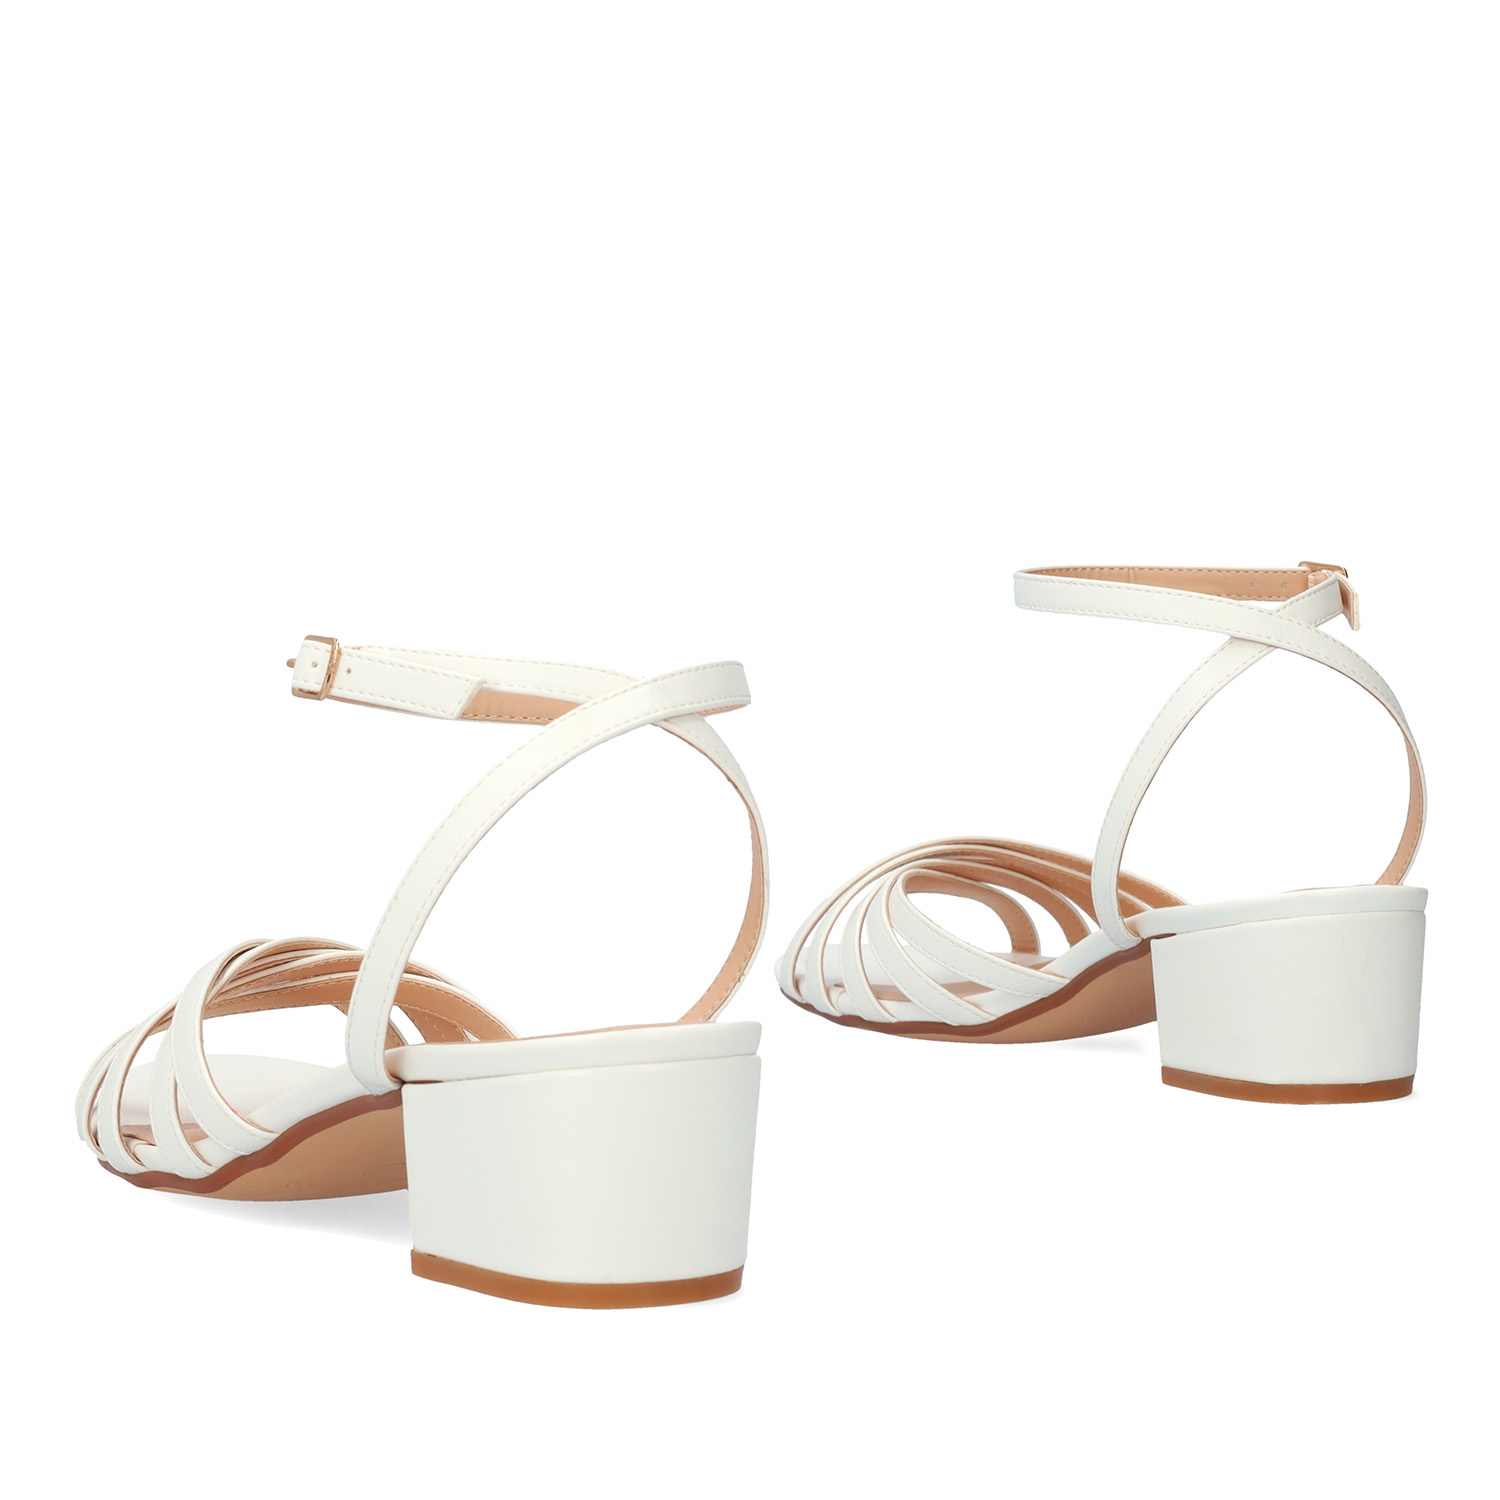 Squared heel sandal in white soft material 